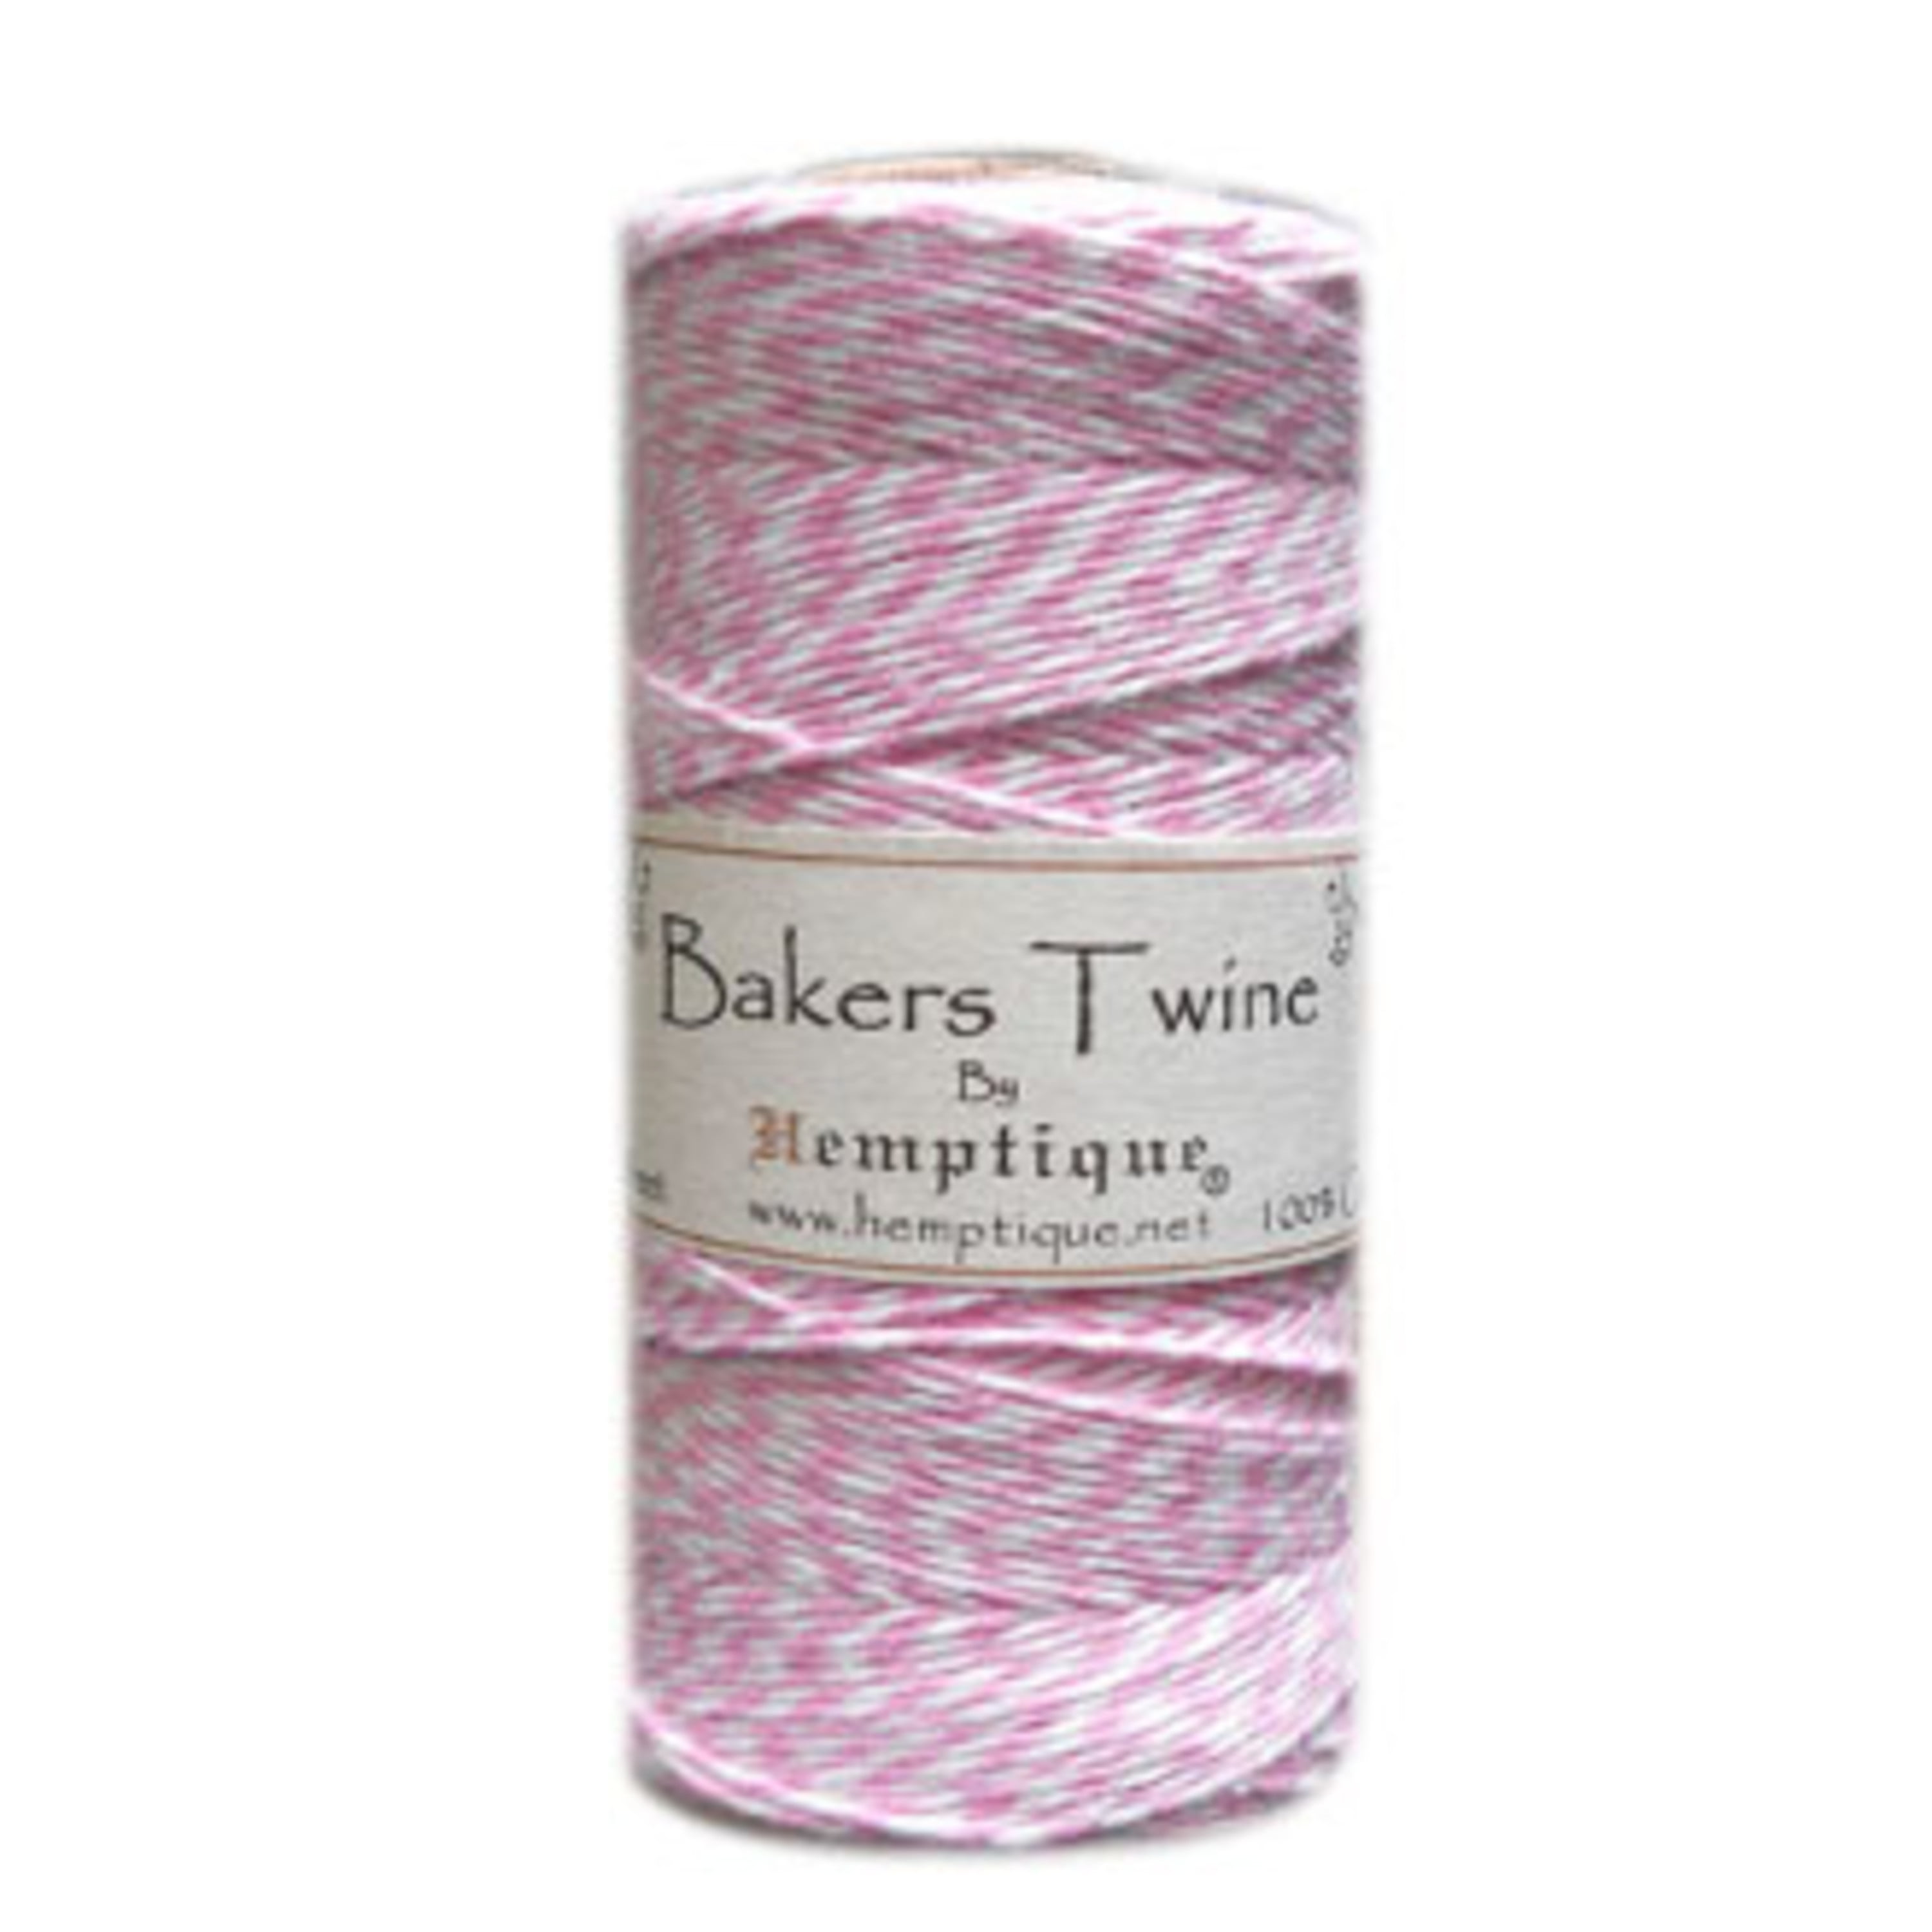 Dark Pink Solid Baker's Twine - 4-ply thin cotton twine – Sprinkled Wishes